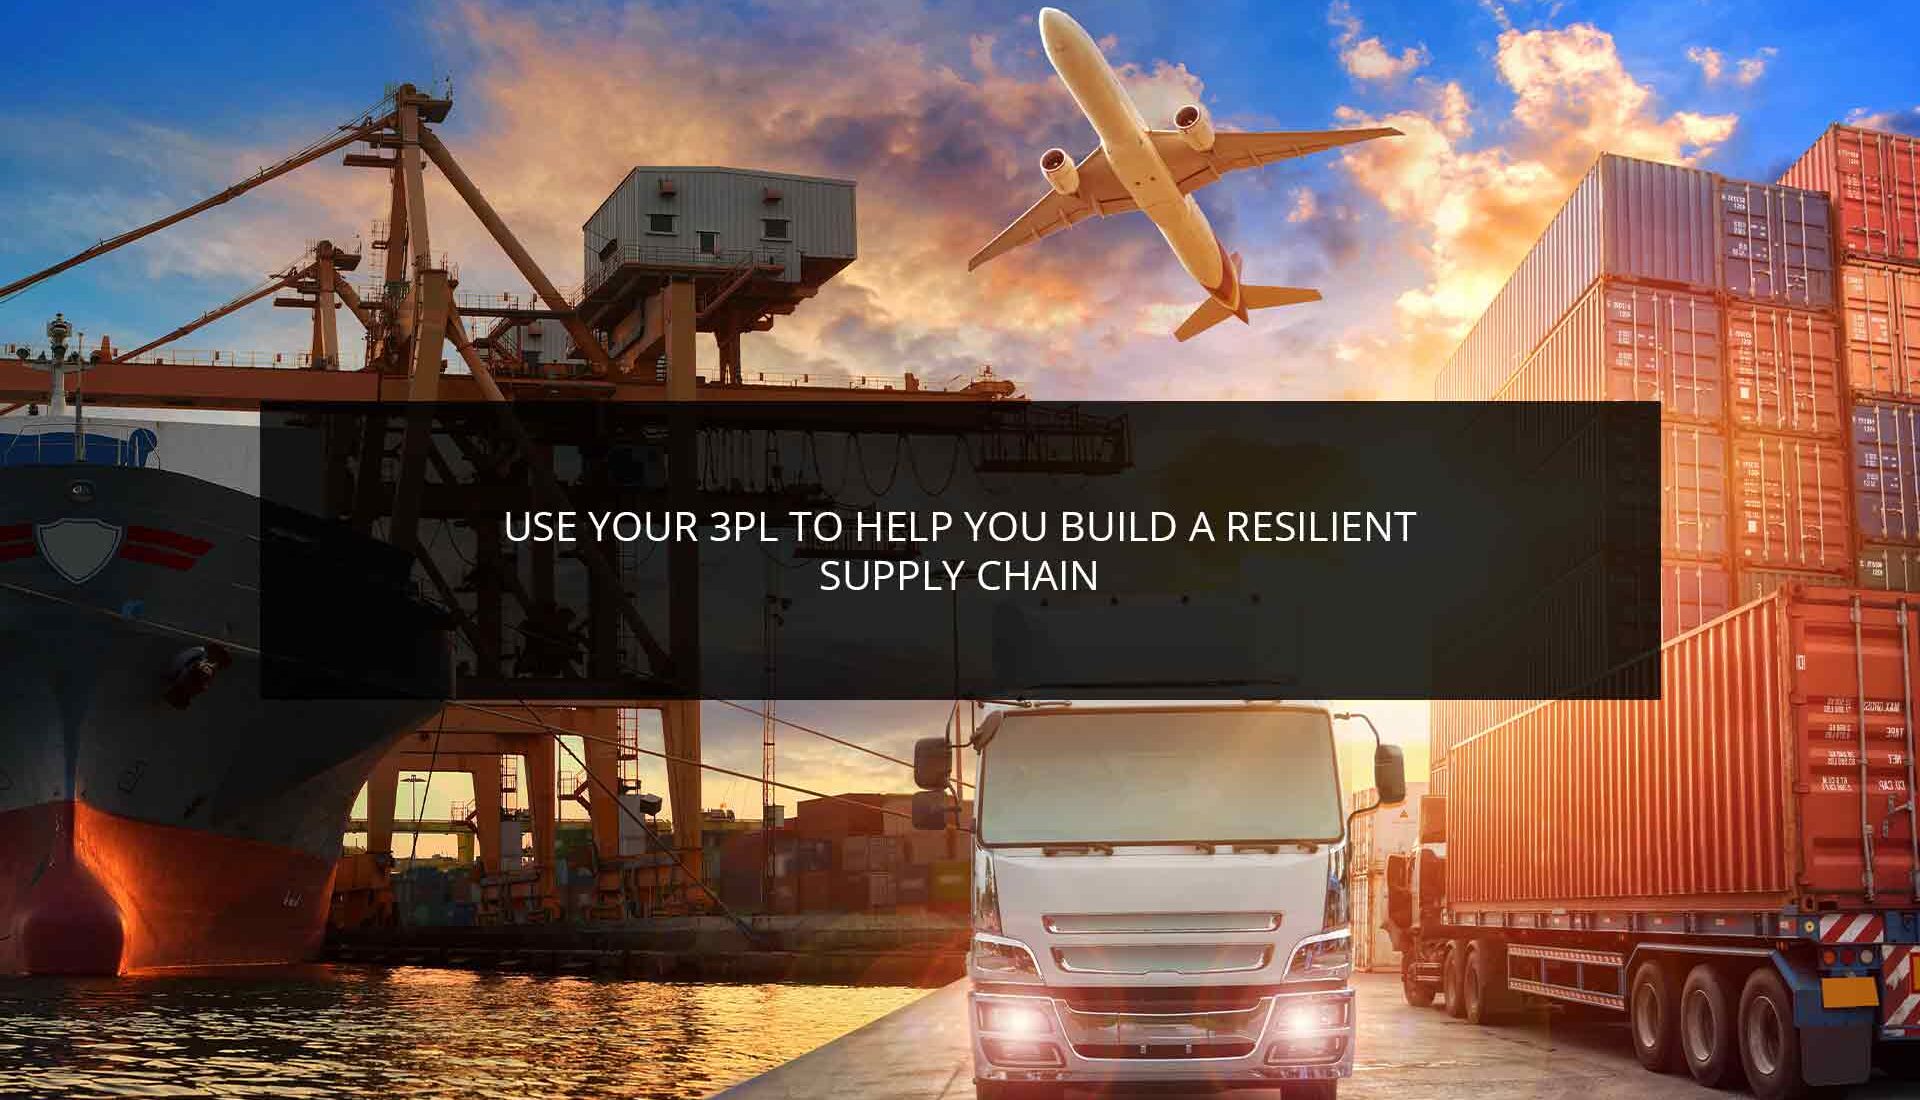 Use Your 3PL to Help You Build a Resilient Supply Chain | Phoenix Investors